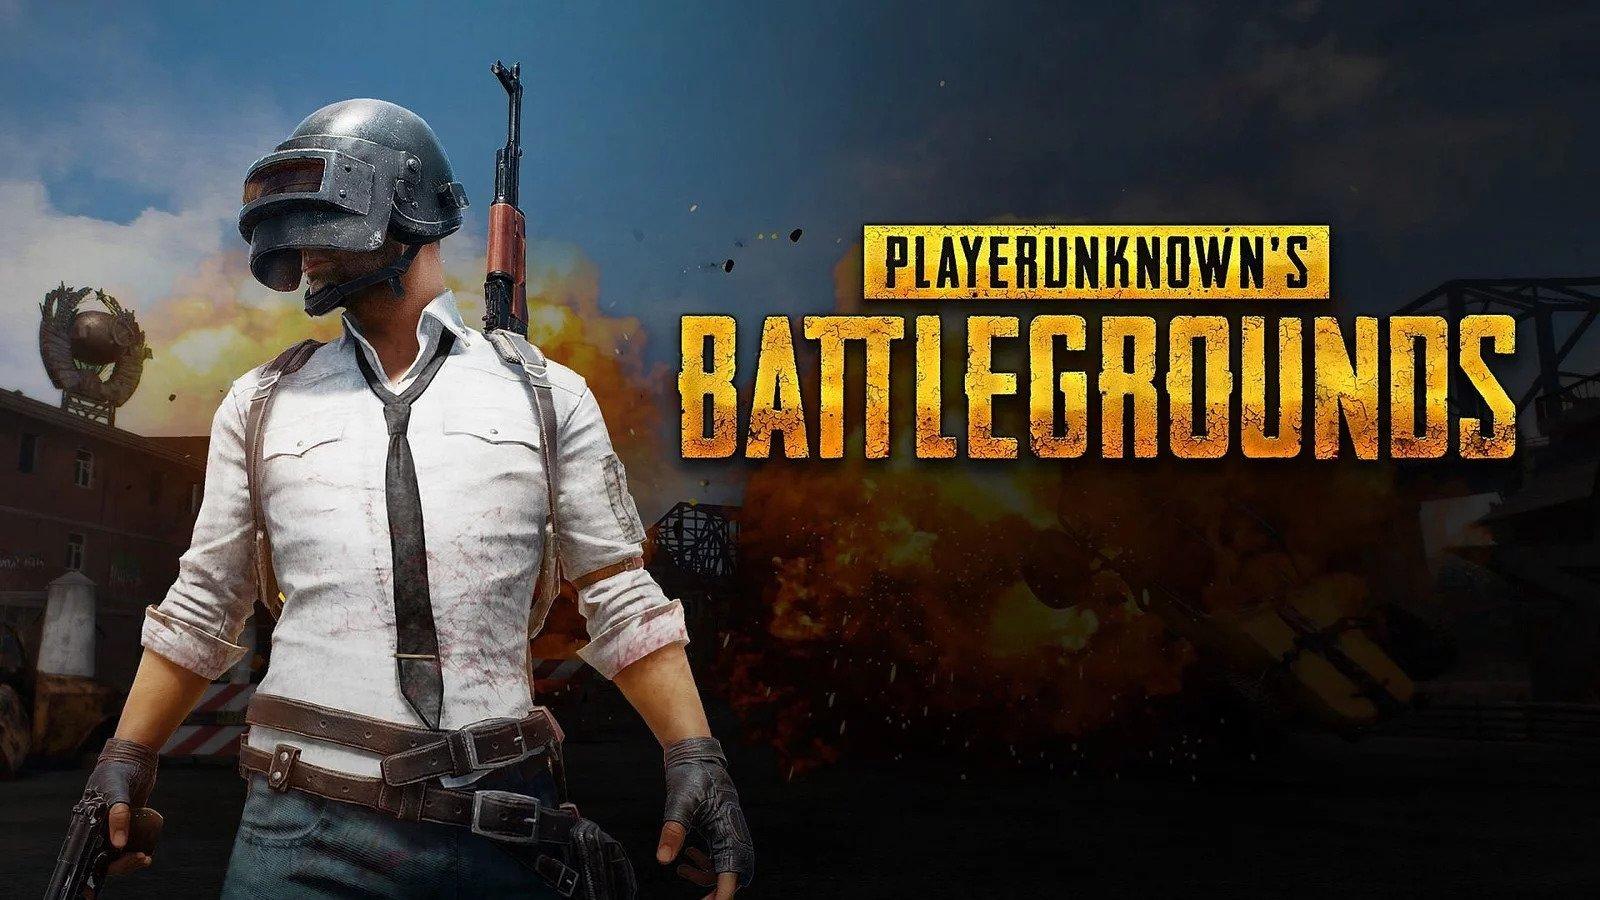 Real Life PUBG: A hundred people compete and live on